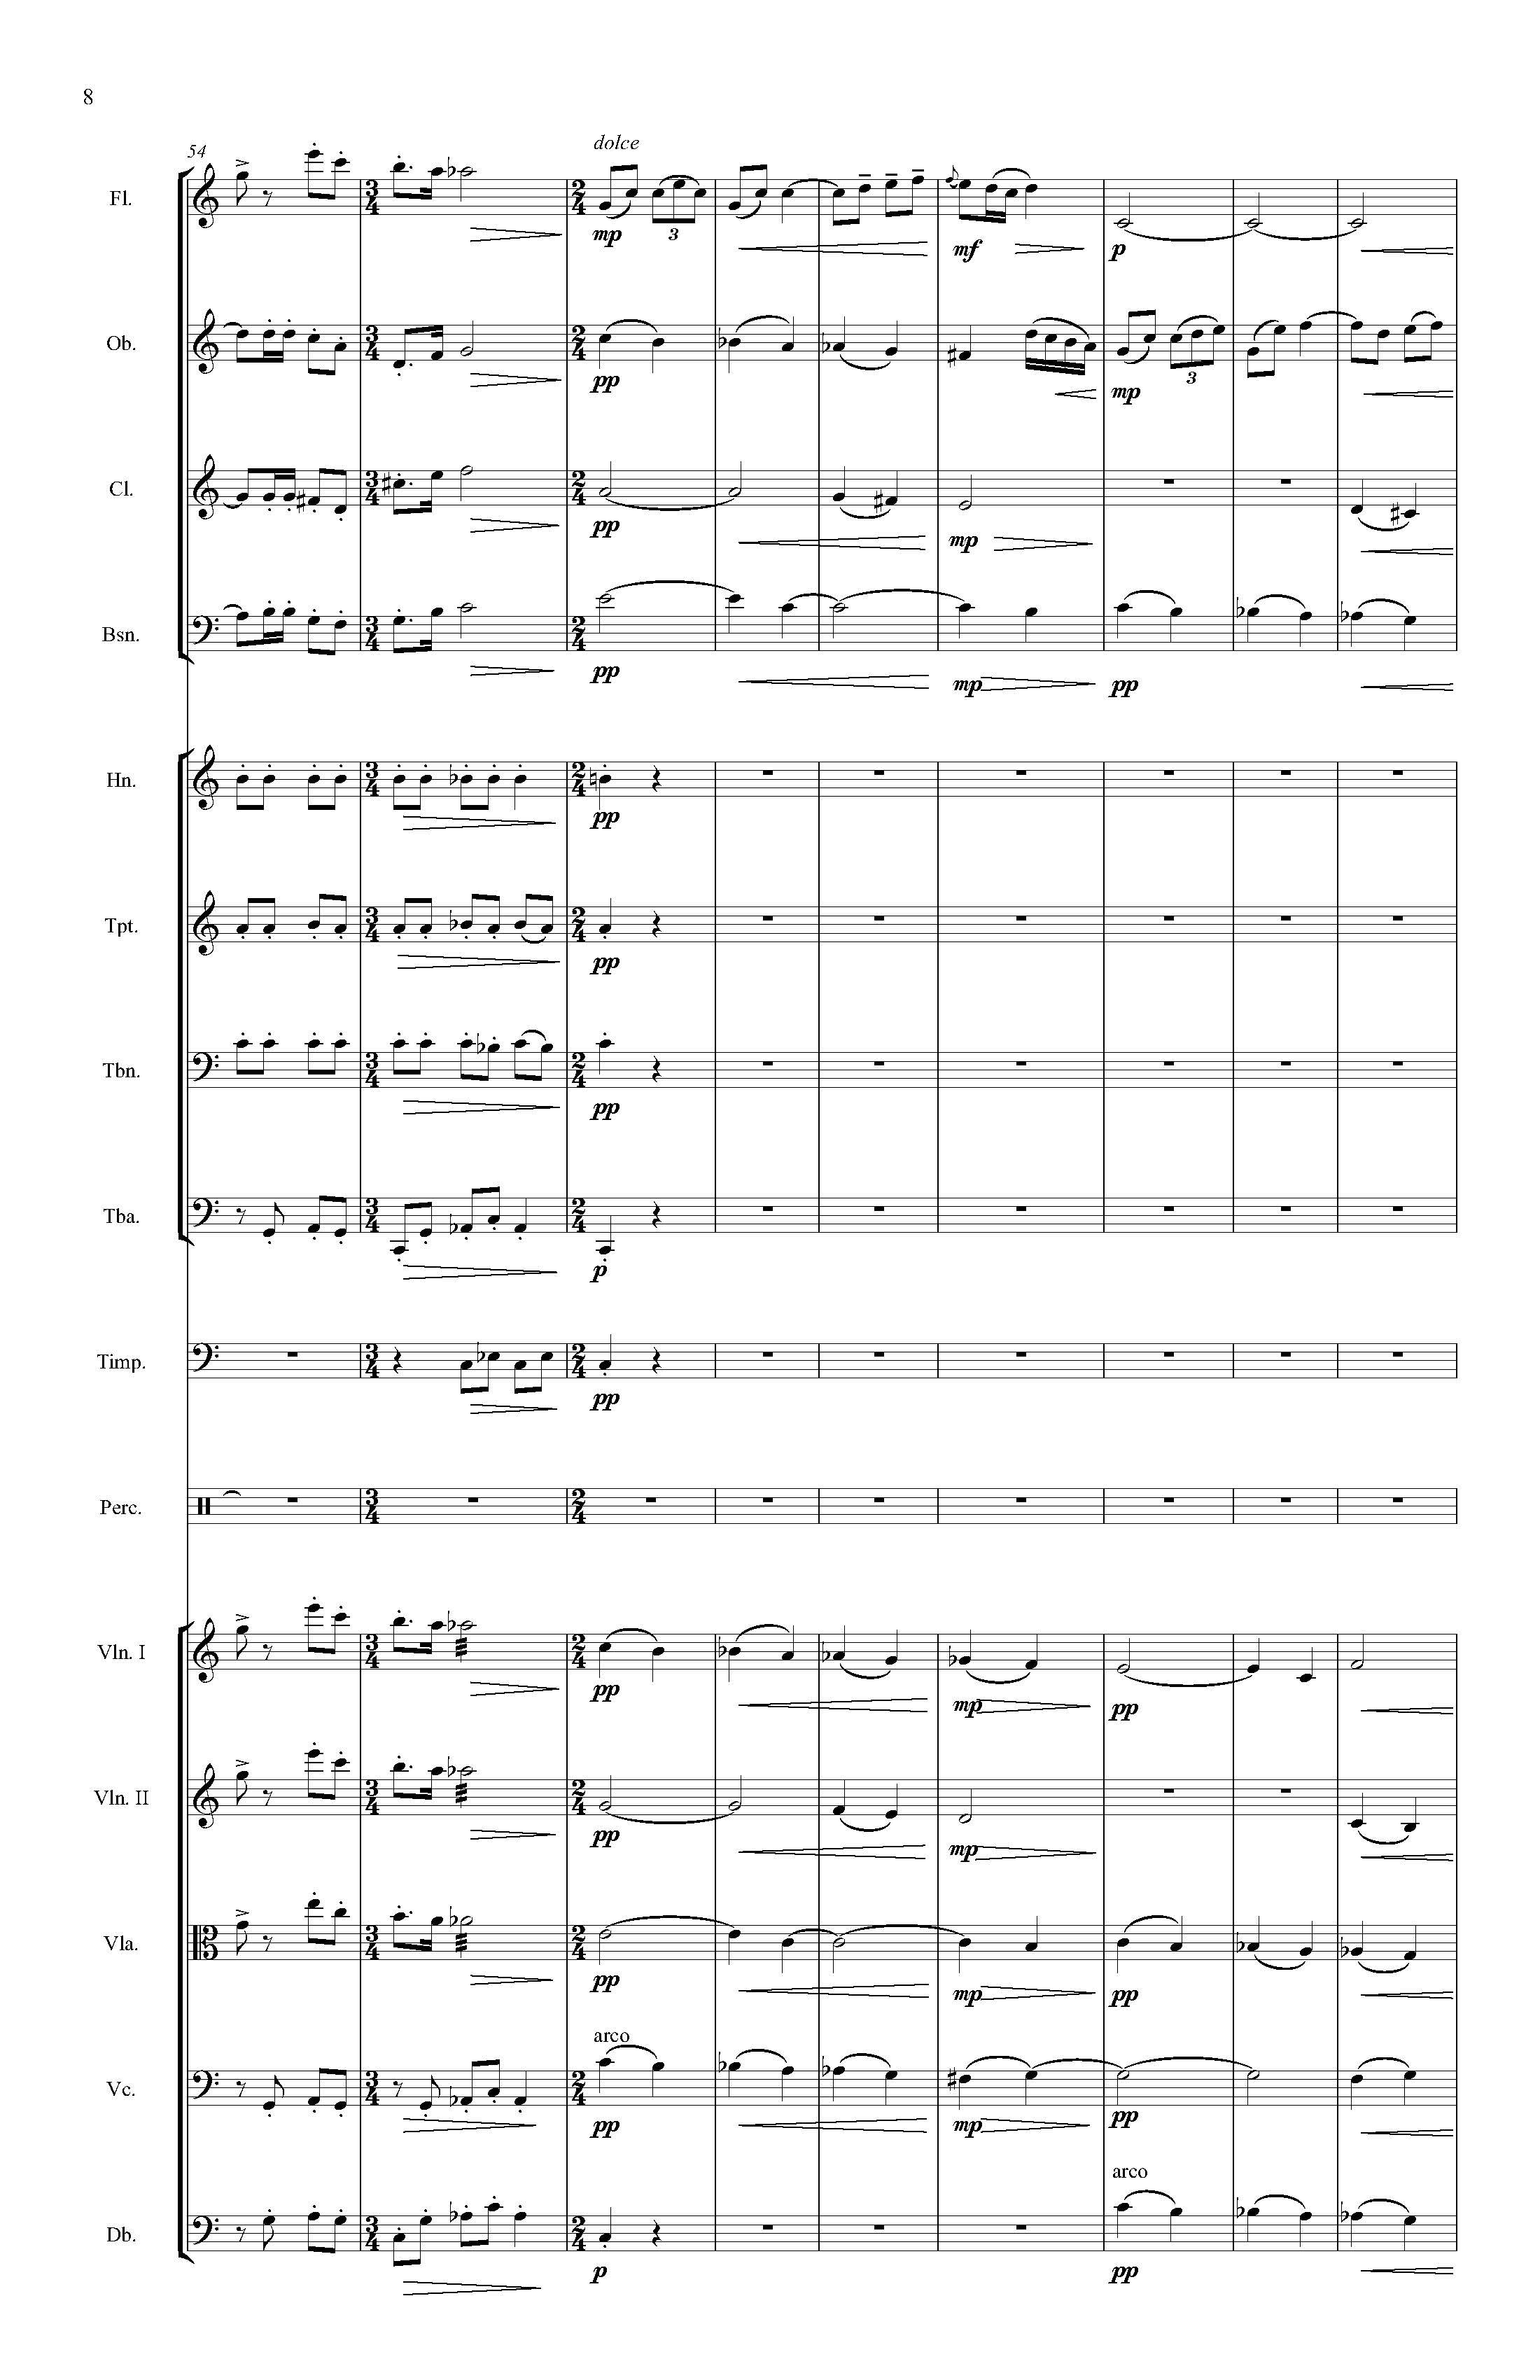 Fantasy on a French Carol - Complete Score_Page_12.jpg